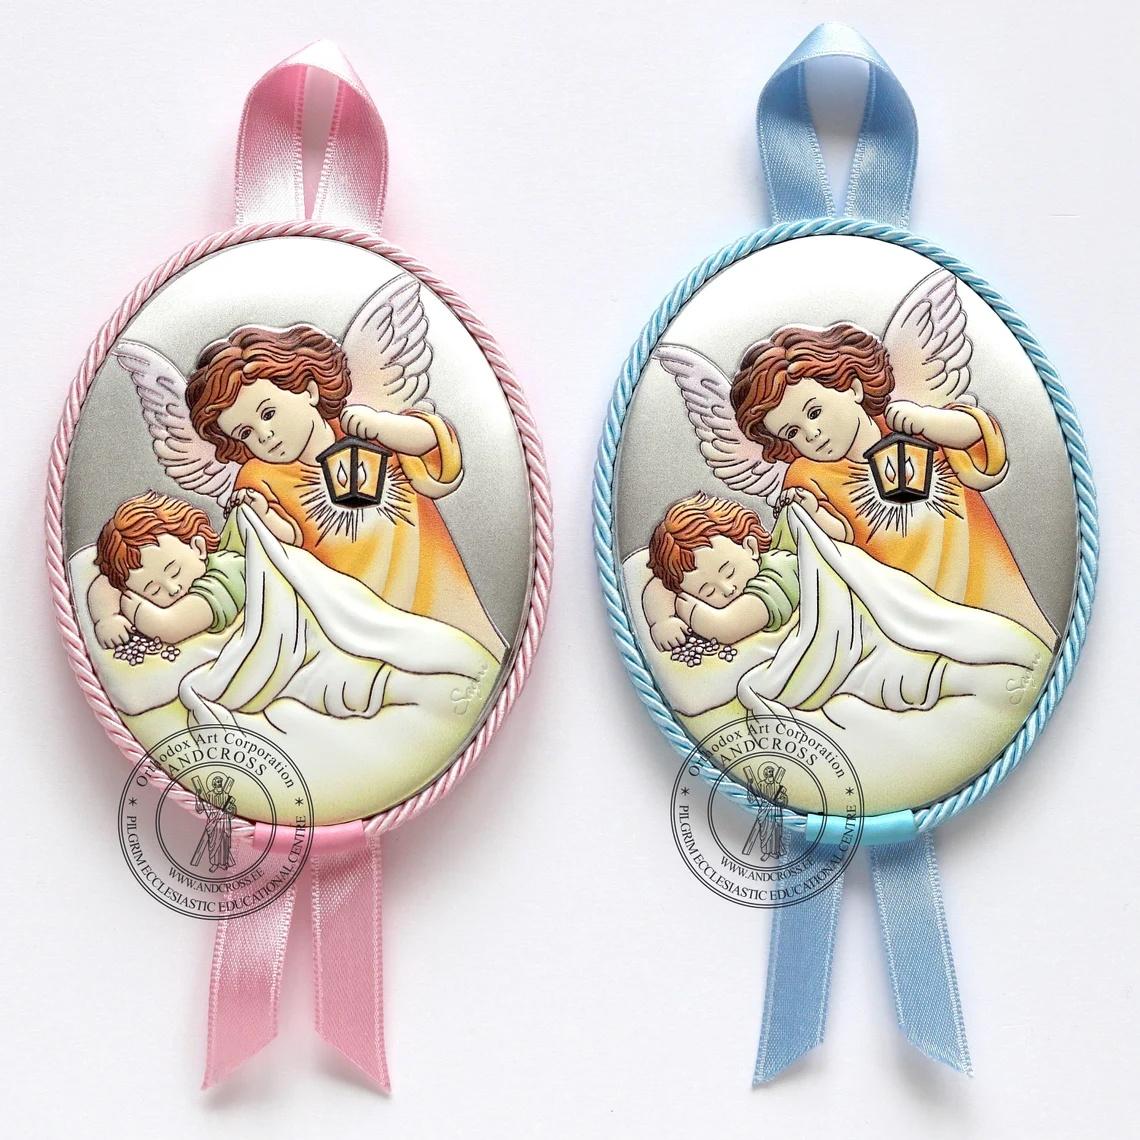 Import placeholder for 27321|Import placeholder for 27321|Import placeholder for 27321|Baby Catholic Wood Icon Guardian Angel Praying Over Baby. Silver Plated .999 ( 3.5″ X 2.8″ ) 9cm X 7cm ( Boy + Girl Set ). B280|Baby Catholic Wood Icon Guardian Angel Praying Over Baby. Silver Plated .999 ( 3.5″ X 2.8″ ) 9cm X 7cm ( Boy + Girl Set ). B280